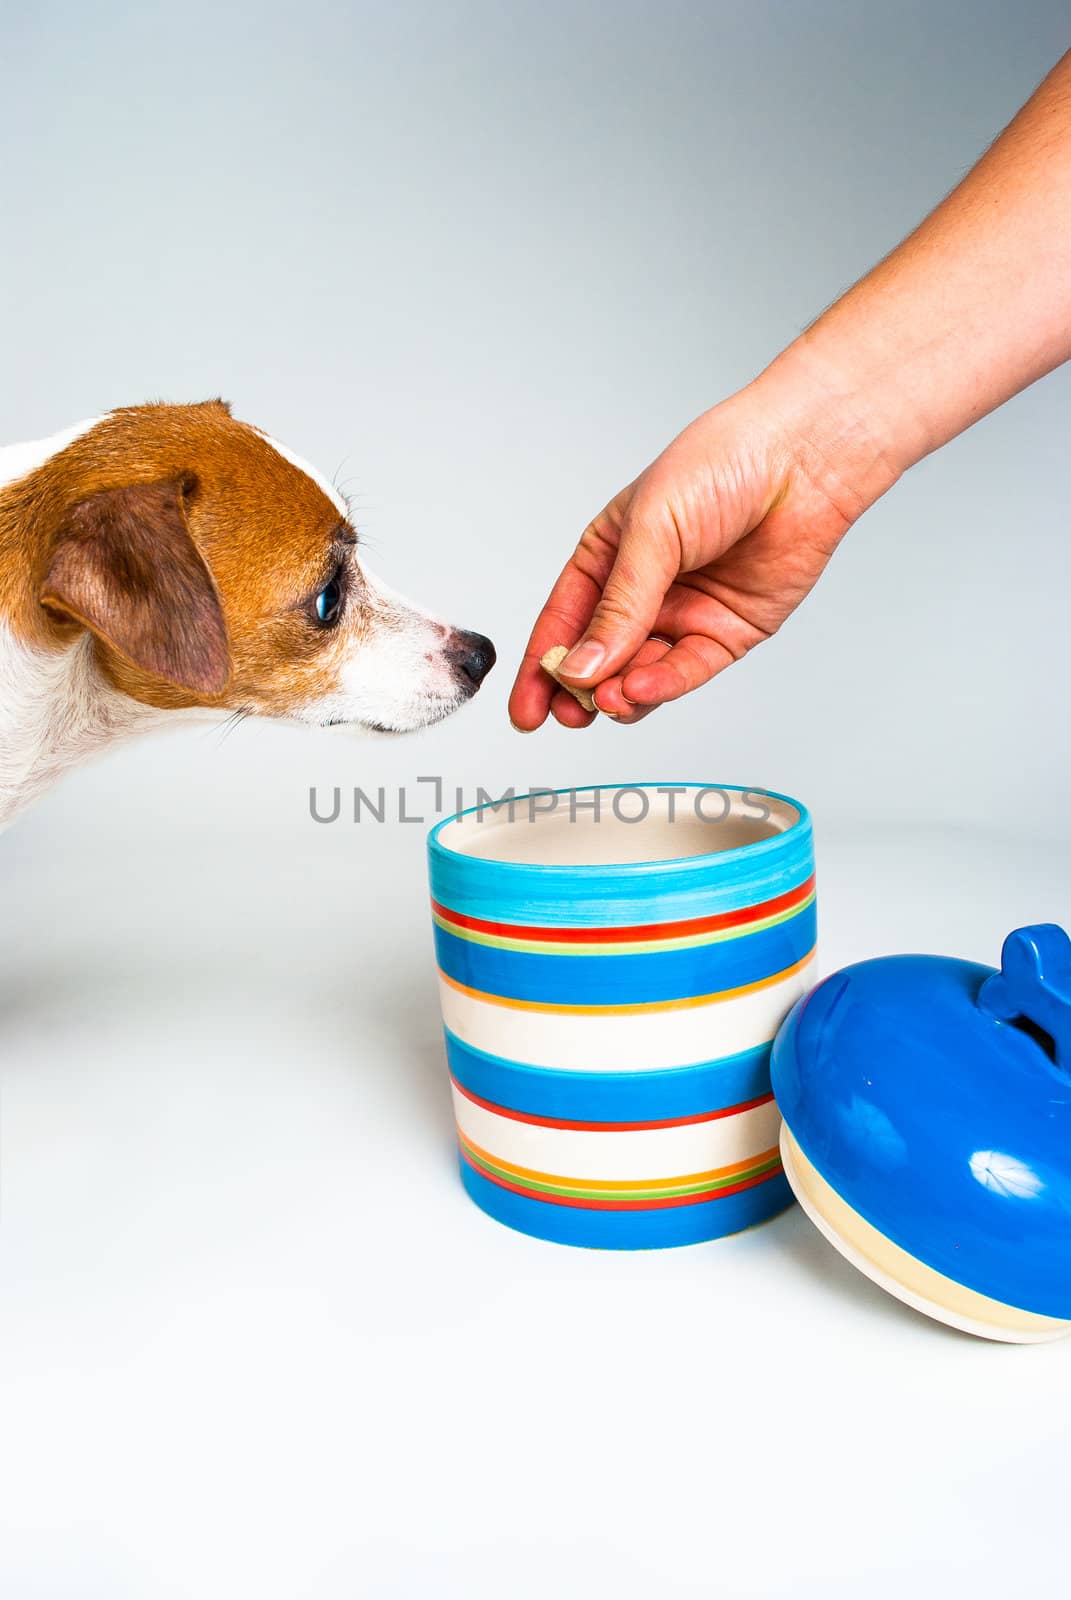 Jack Russell Terrier gets a Cookie from the Cookie Jar on white  by oliverjw